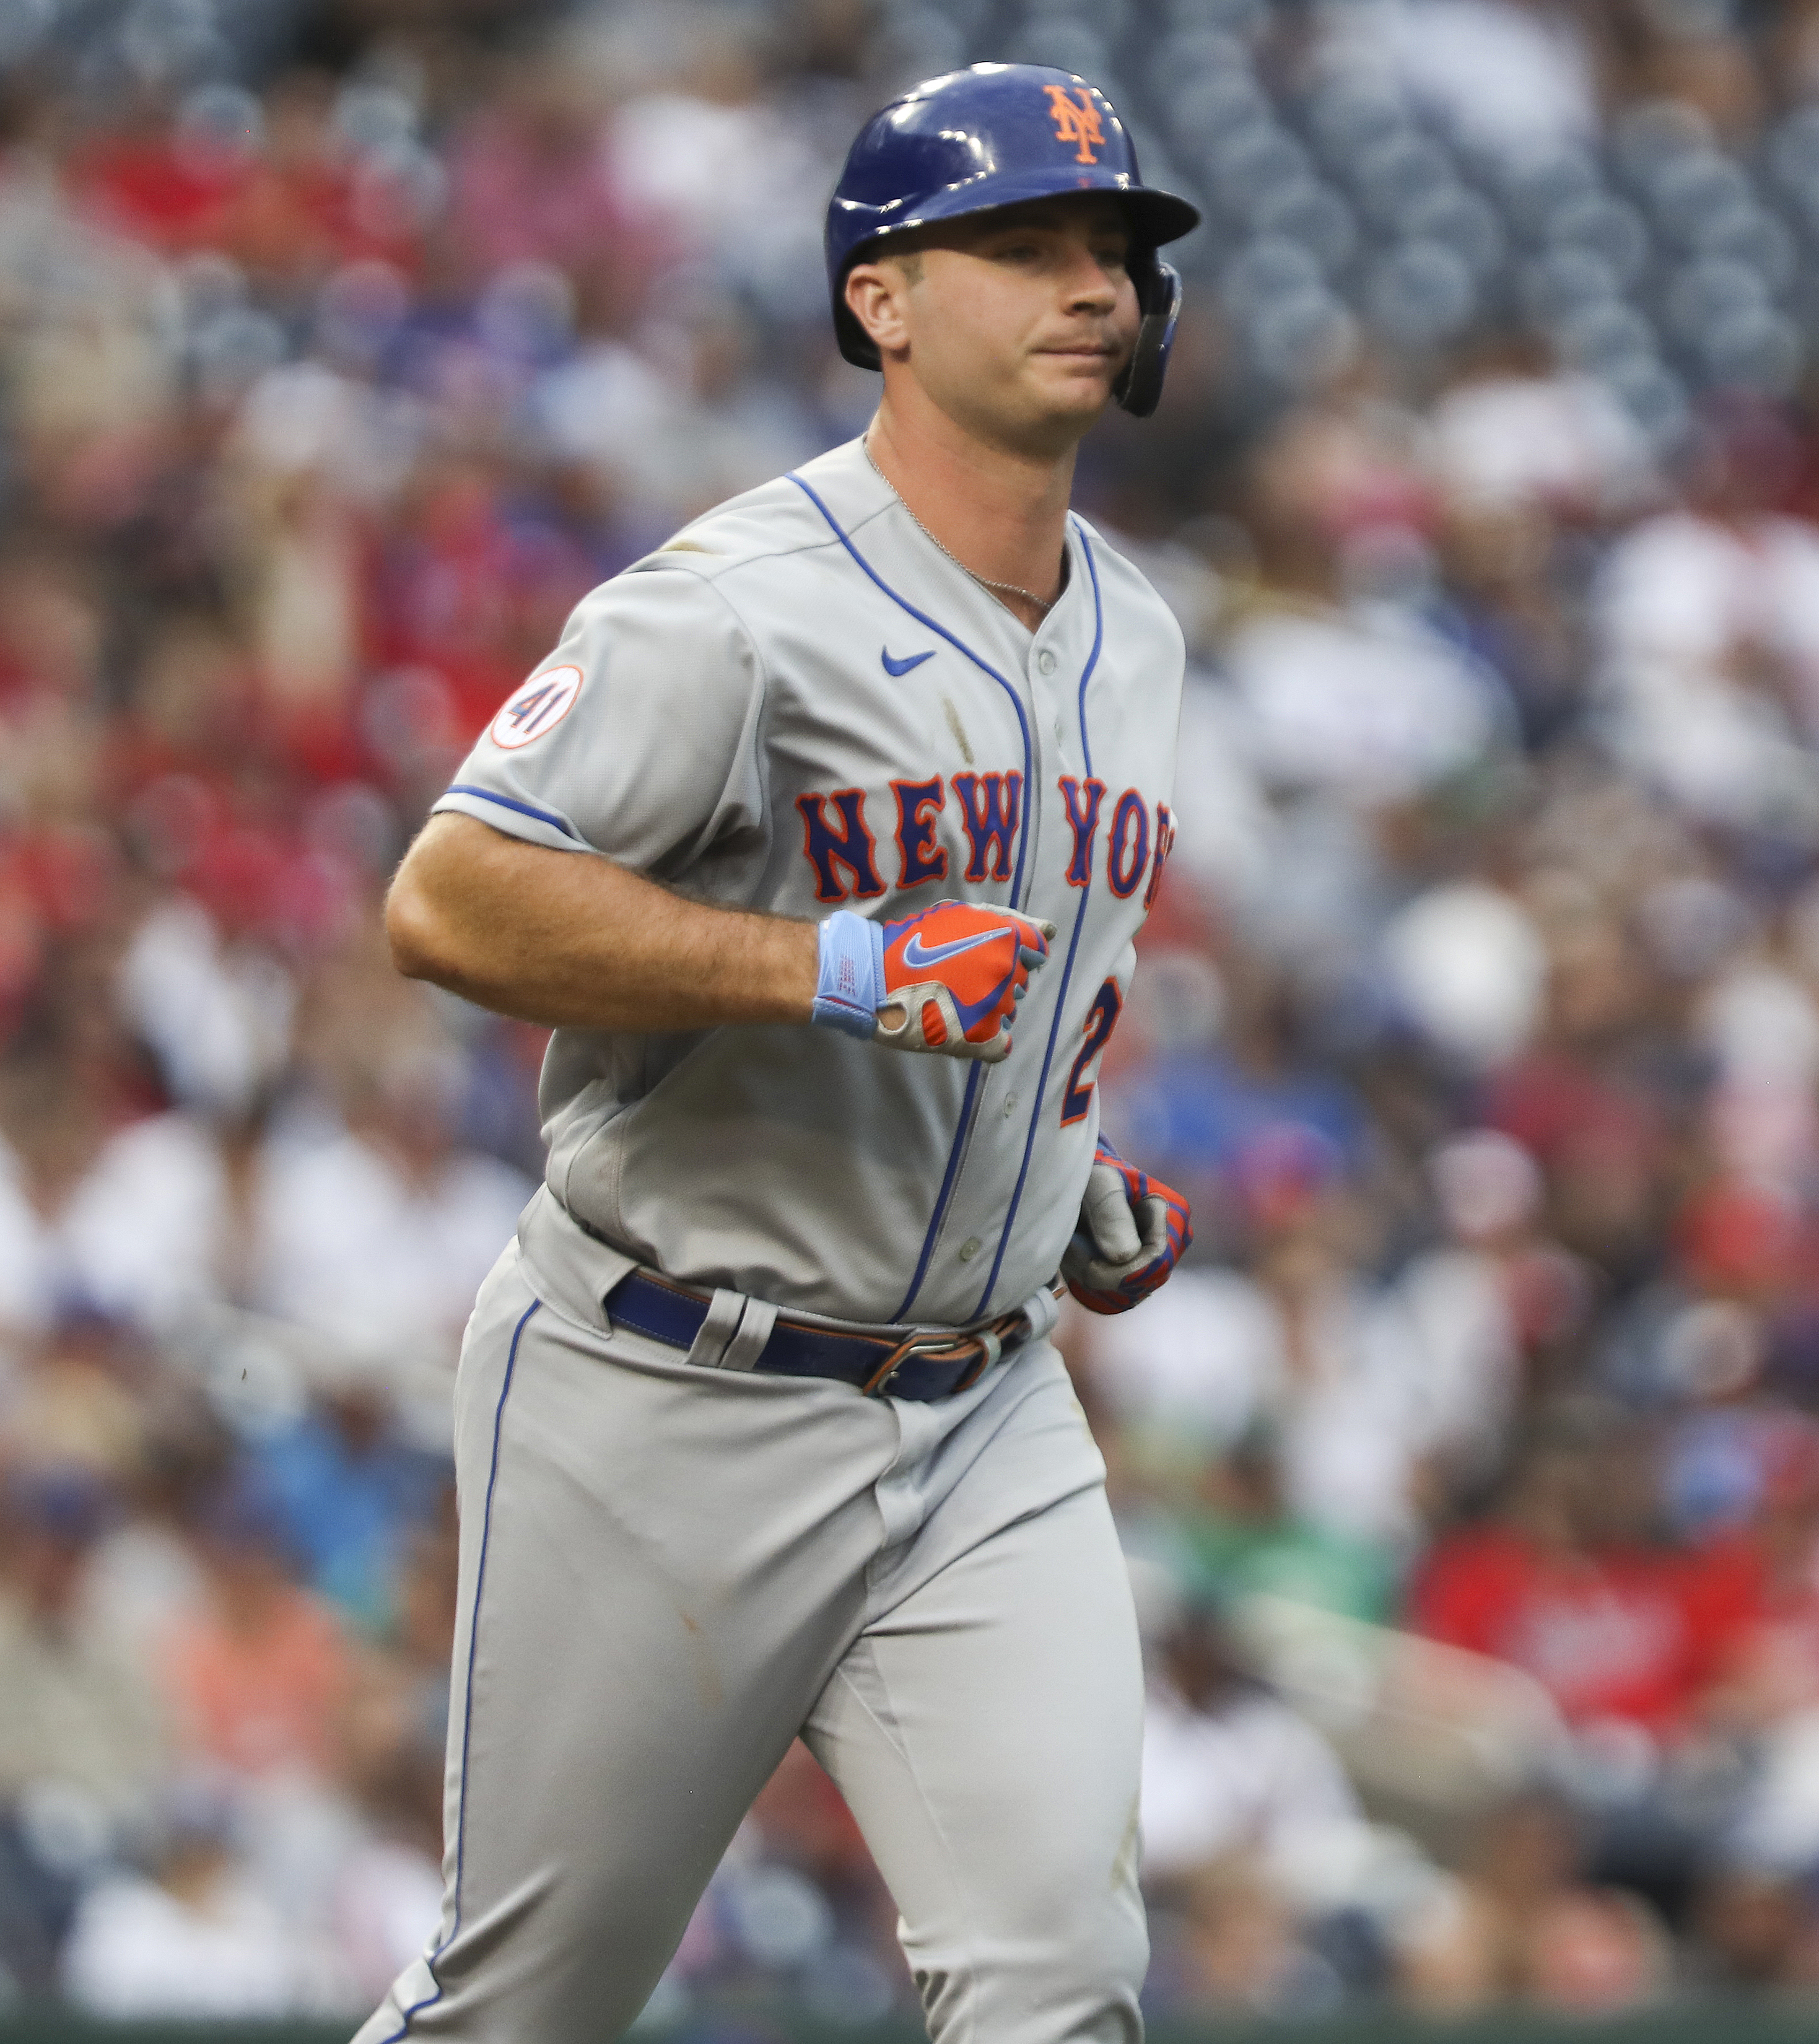 Plant High's Pete Alonso is slugging his way into baseball history and the  hearts of Mets fans